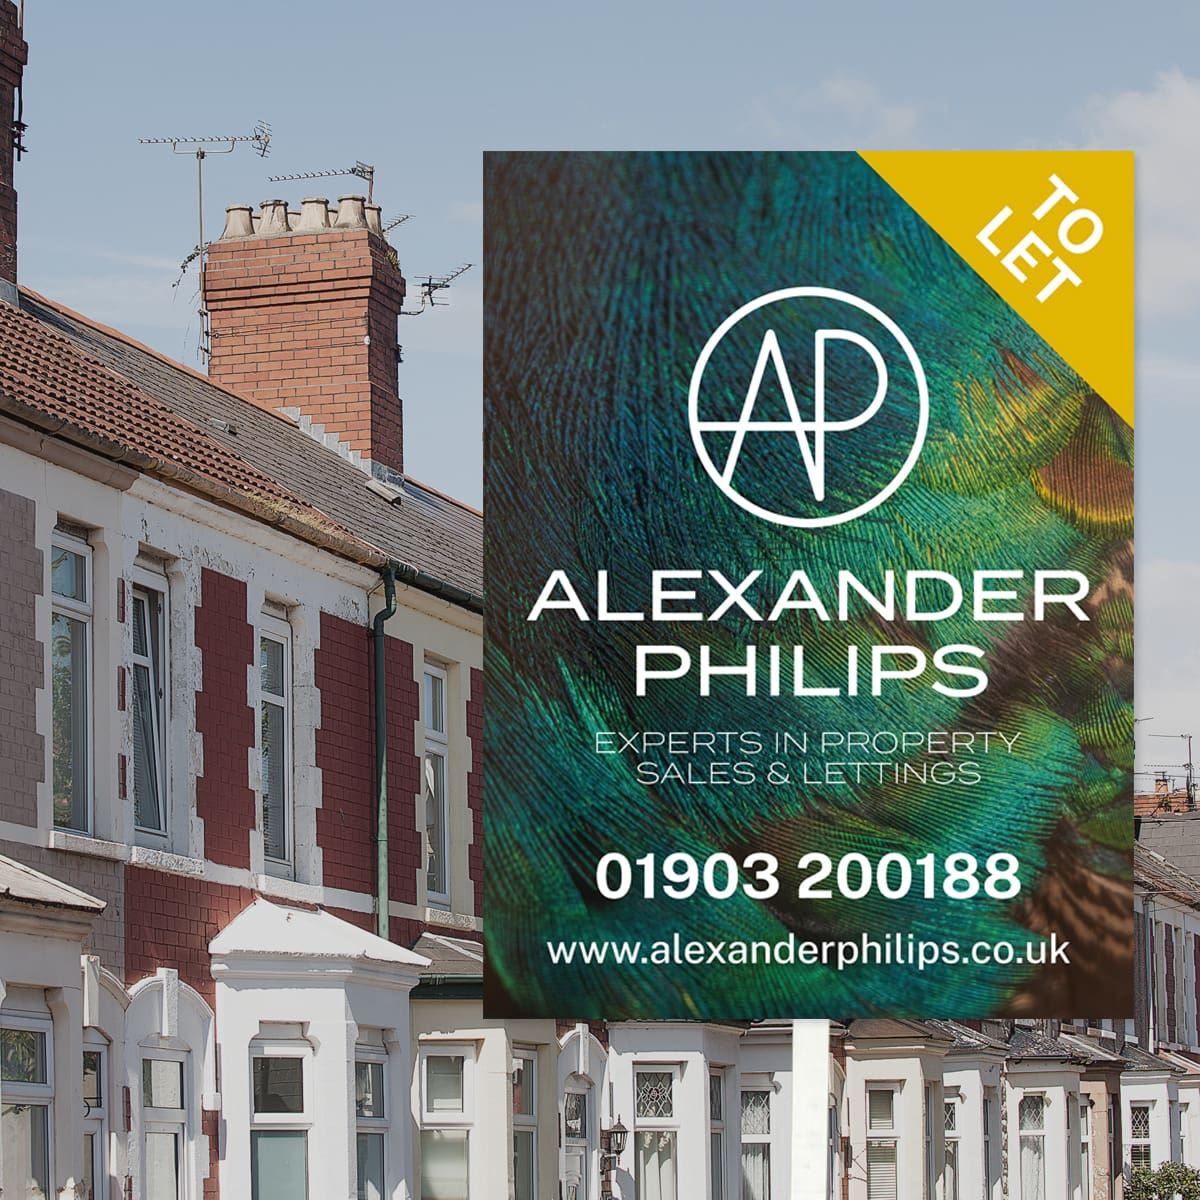 Put your property in safe hands with Alexander Philips